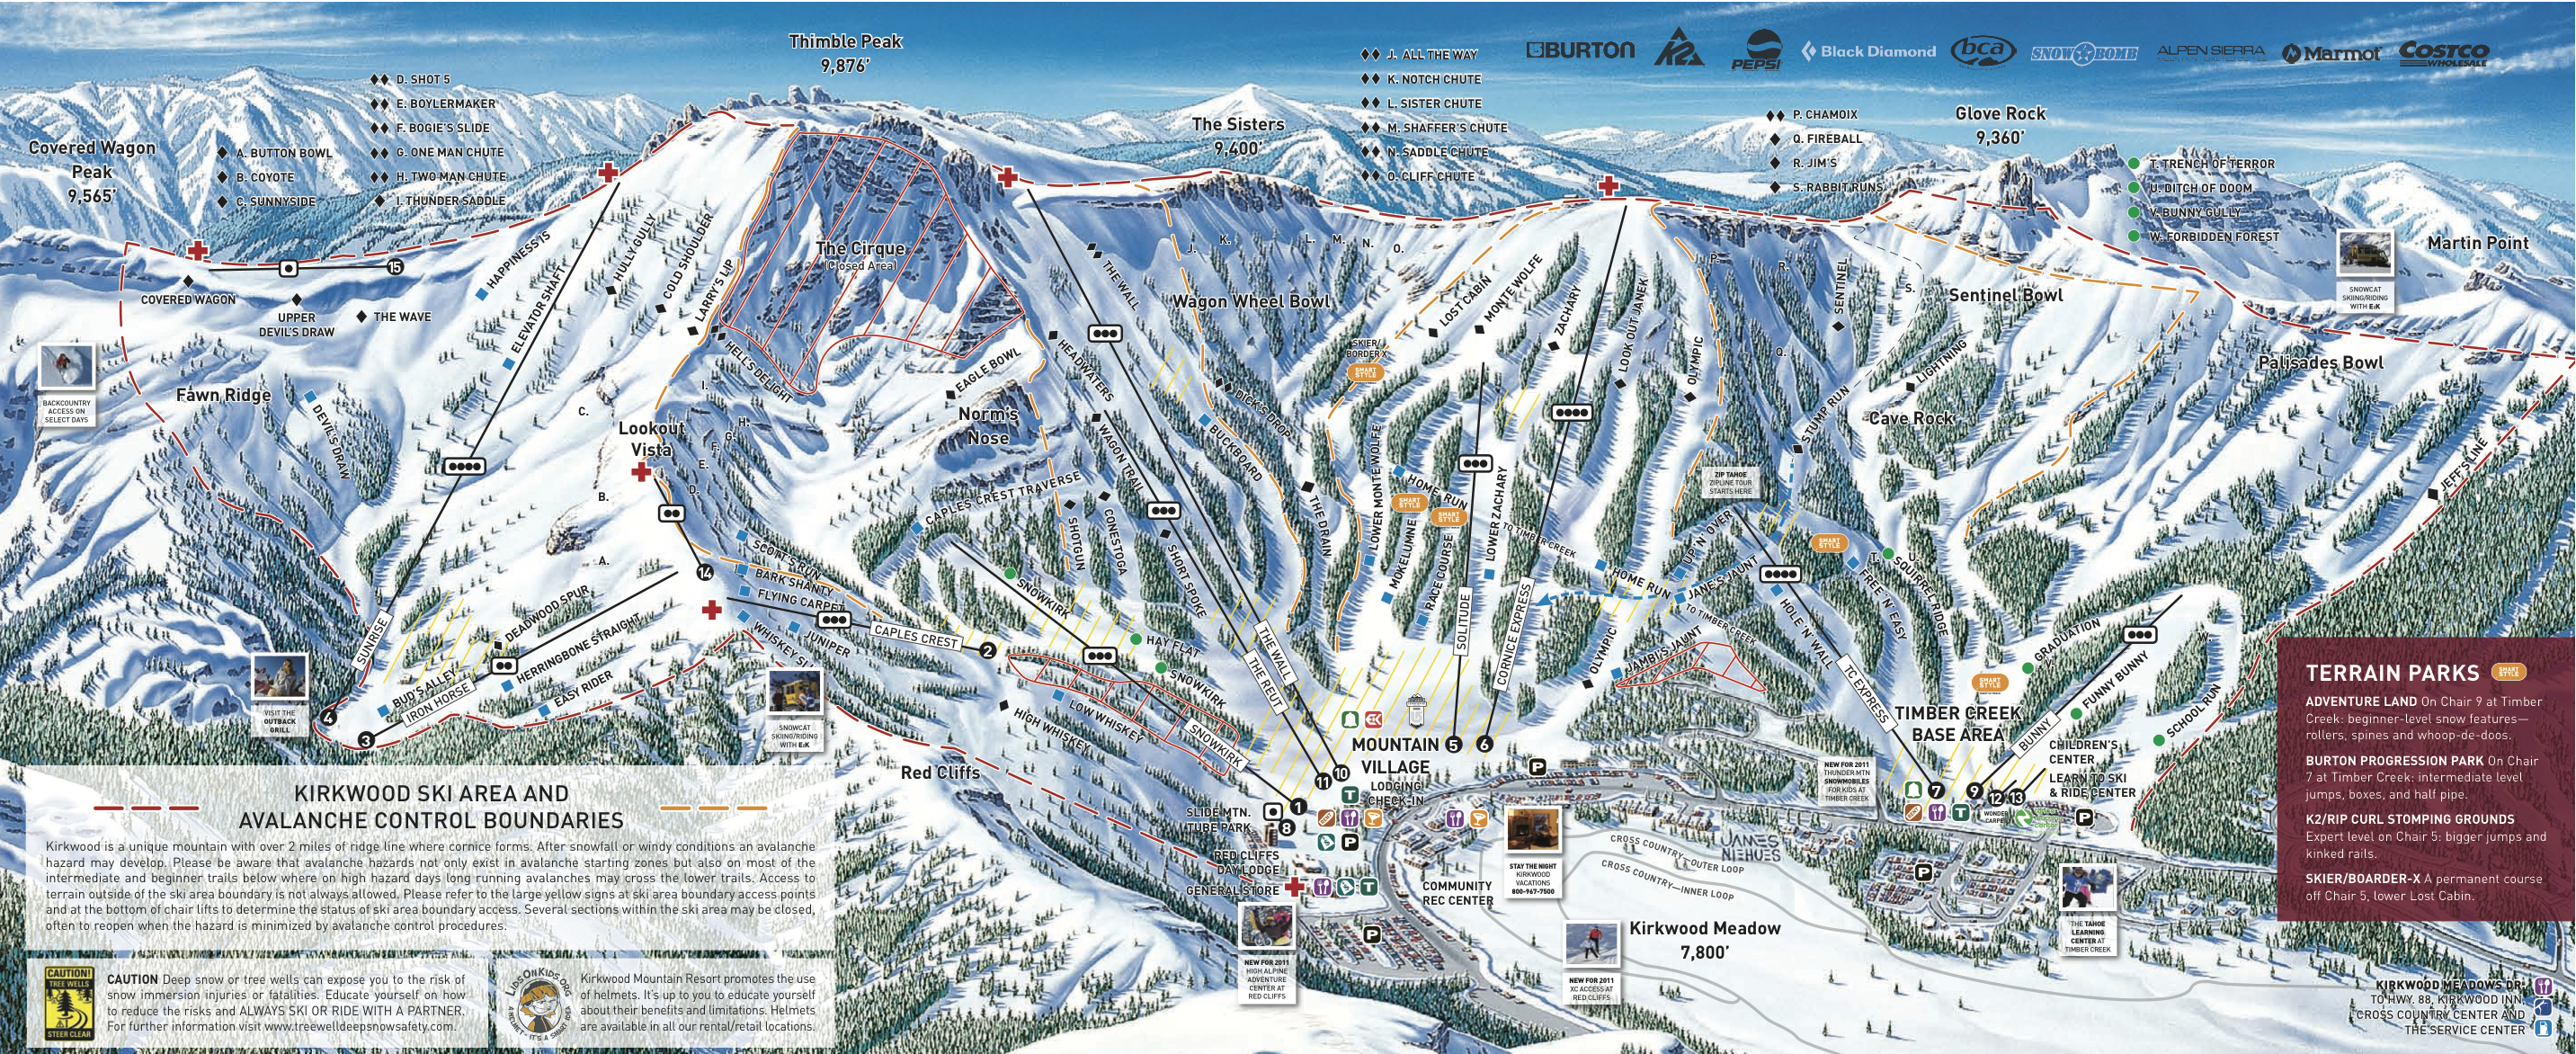  map to view a full-sized version of the trails at Kirkwood ski resort.